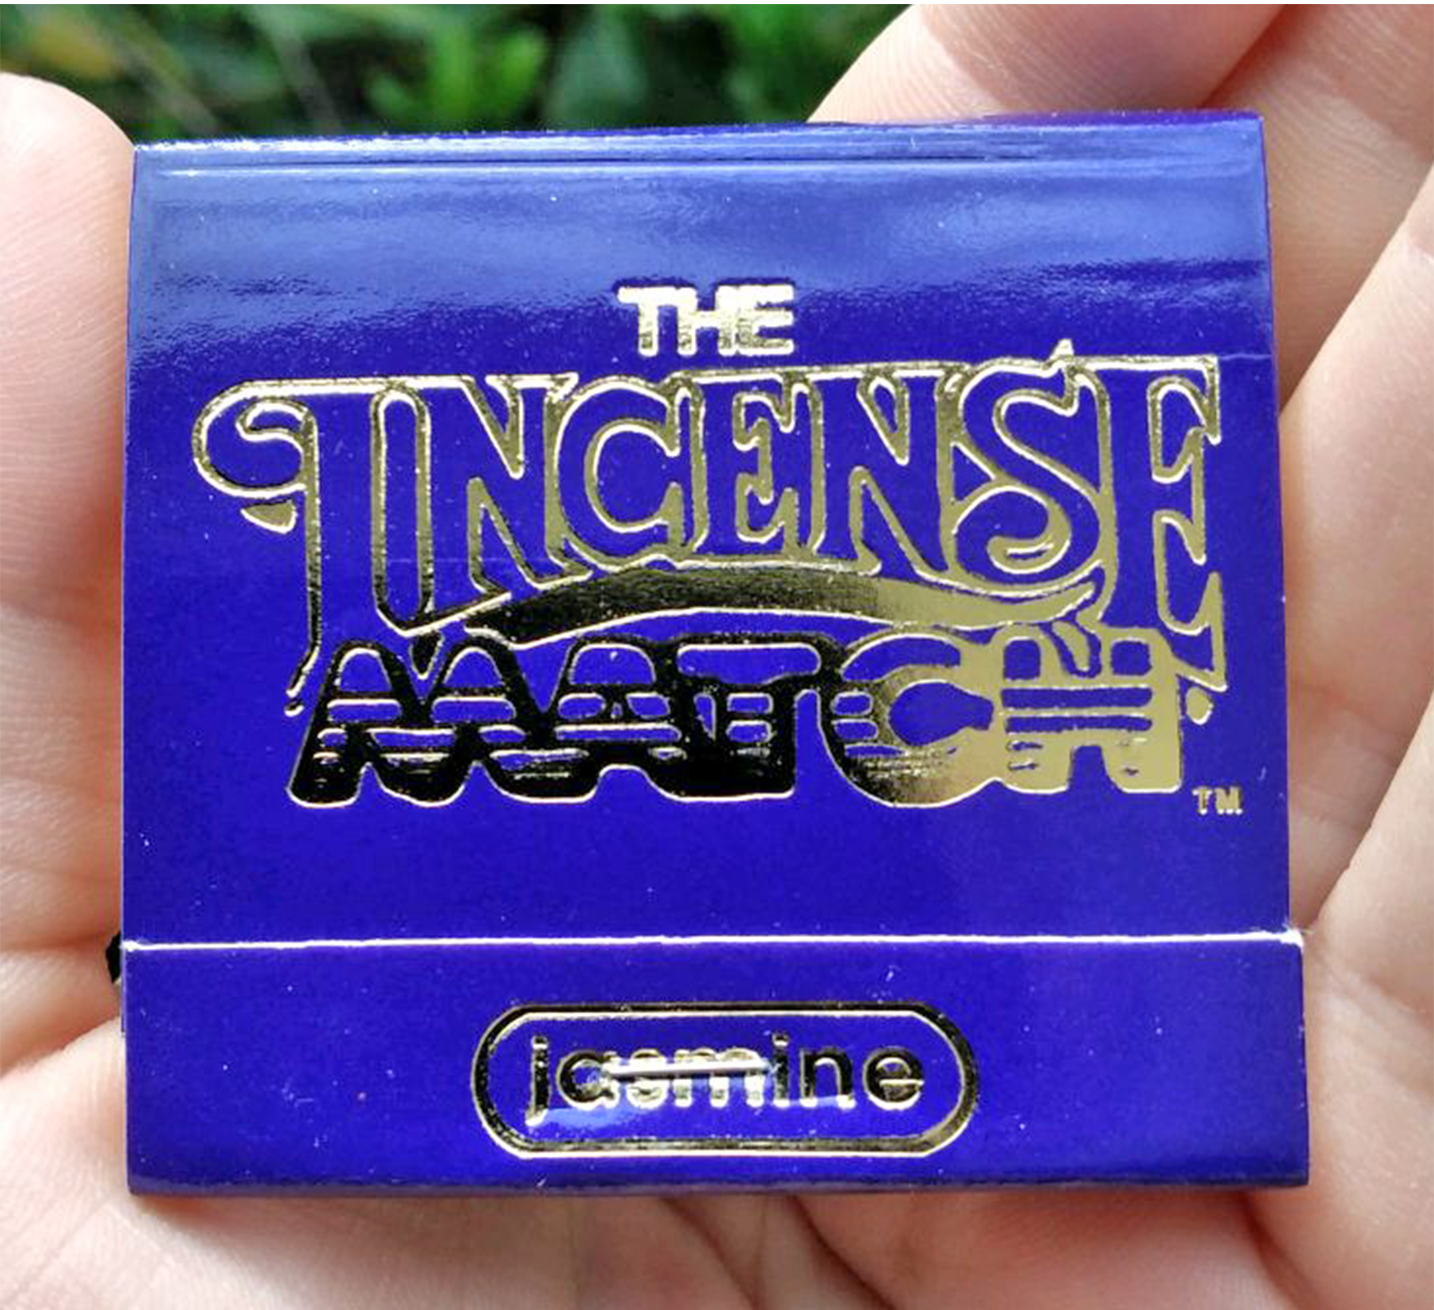 Incense Matches review